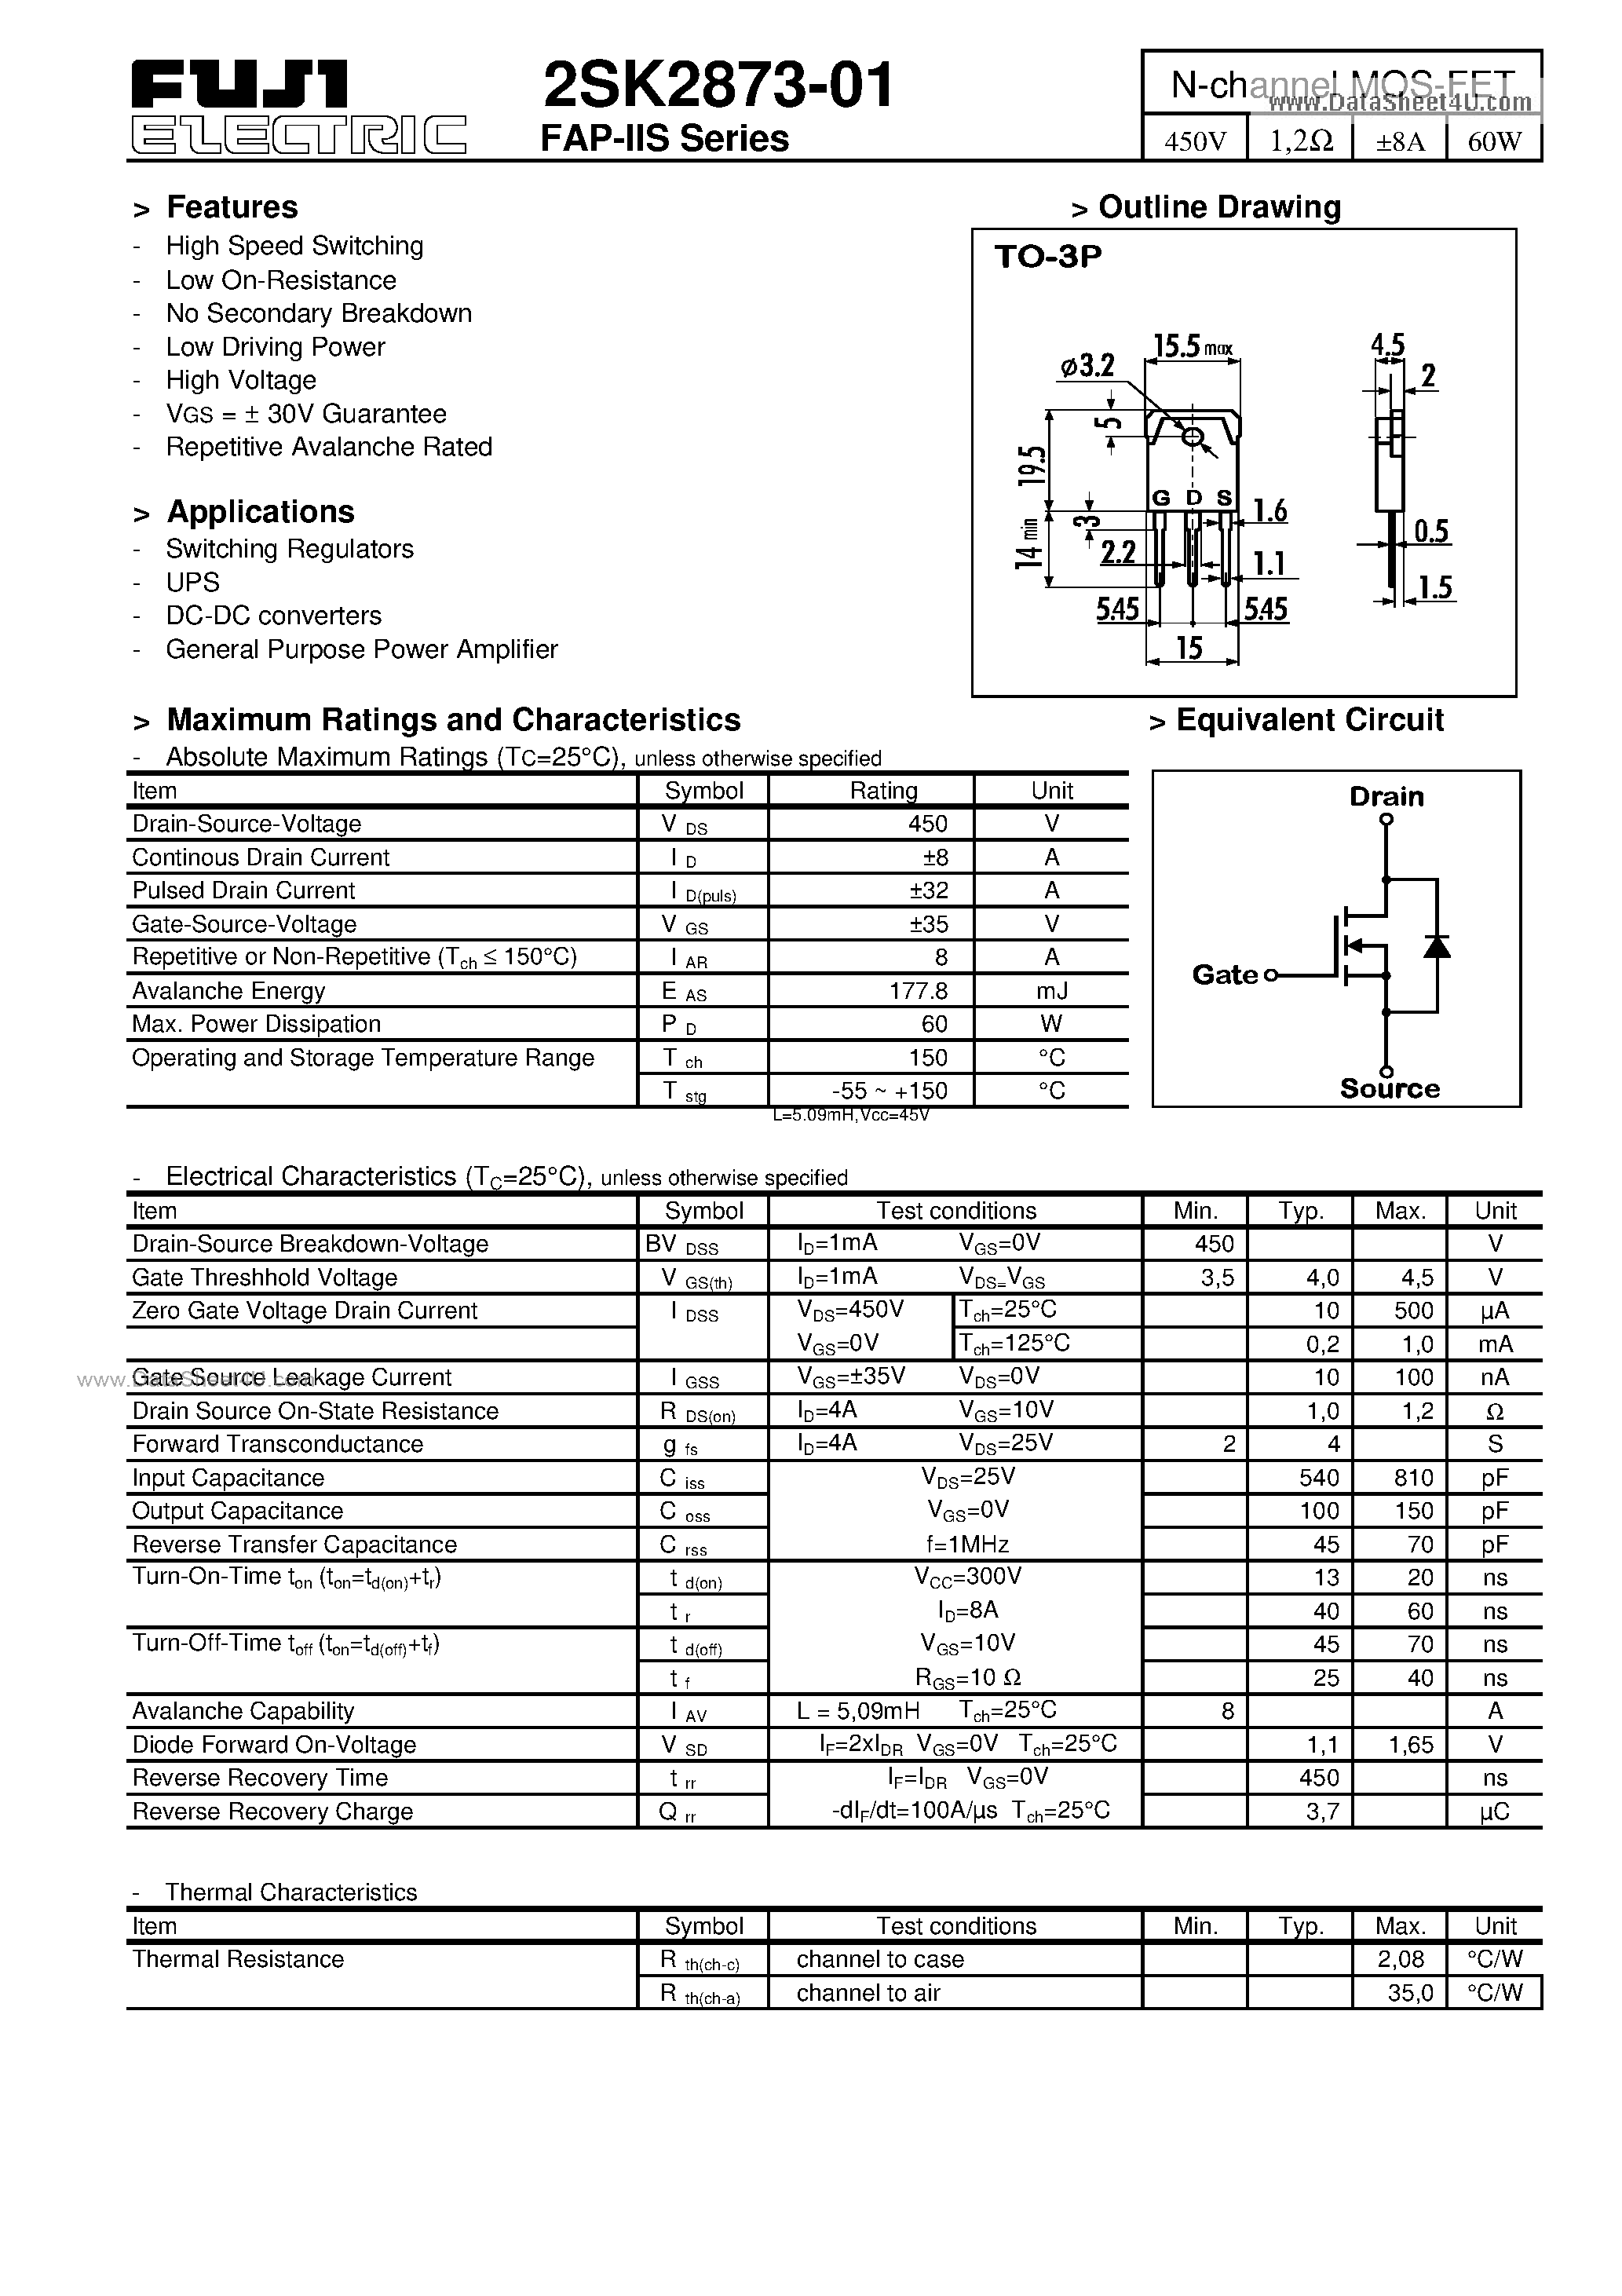 Datasheet K2873-01 - Search -----> 2SK2873-01 page 1